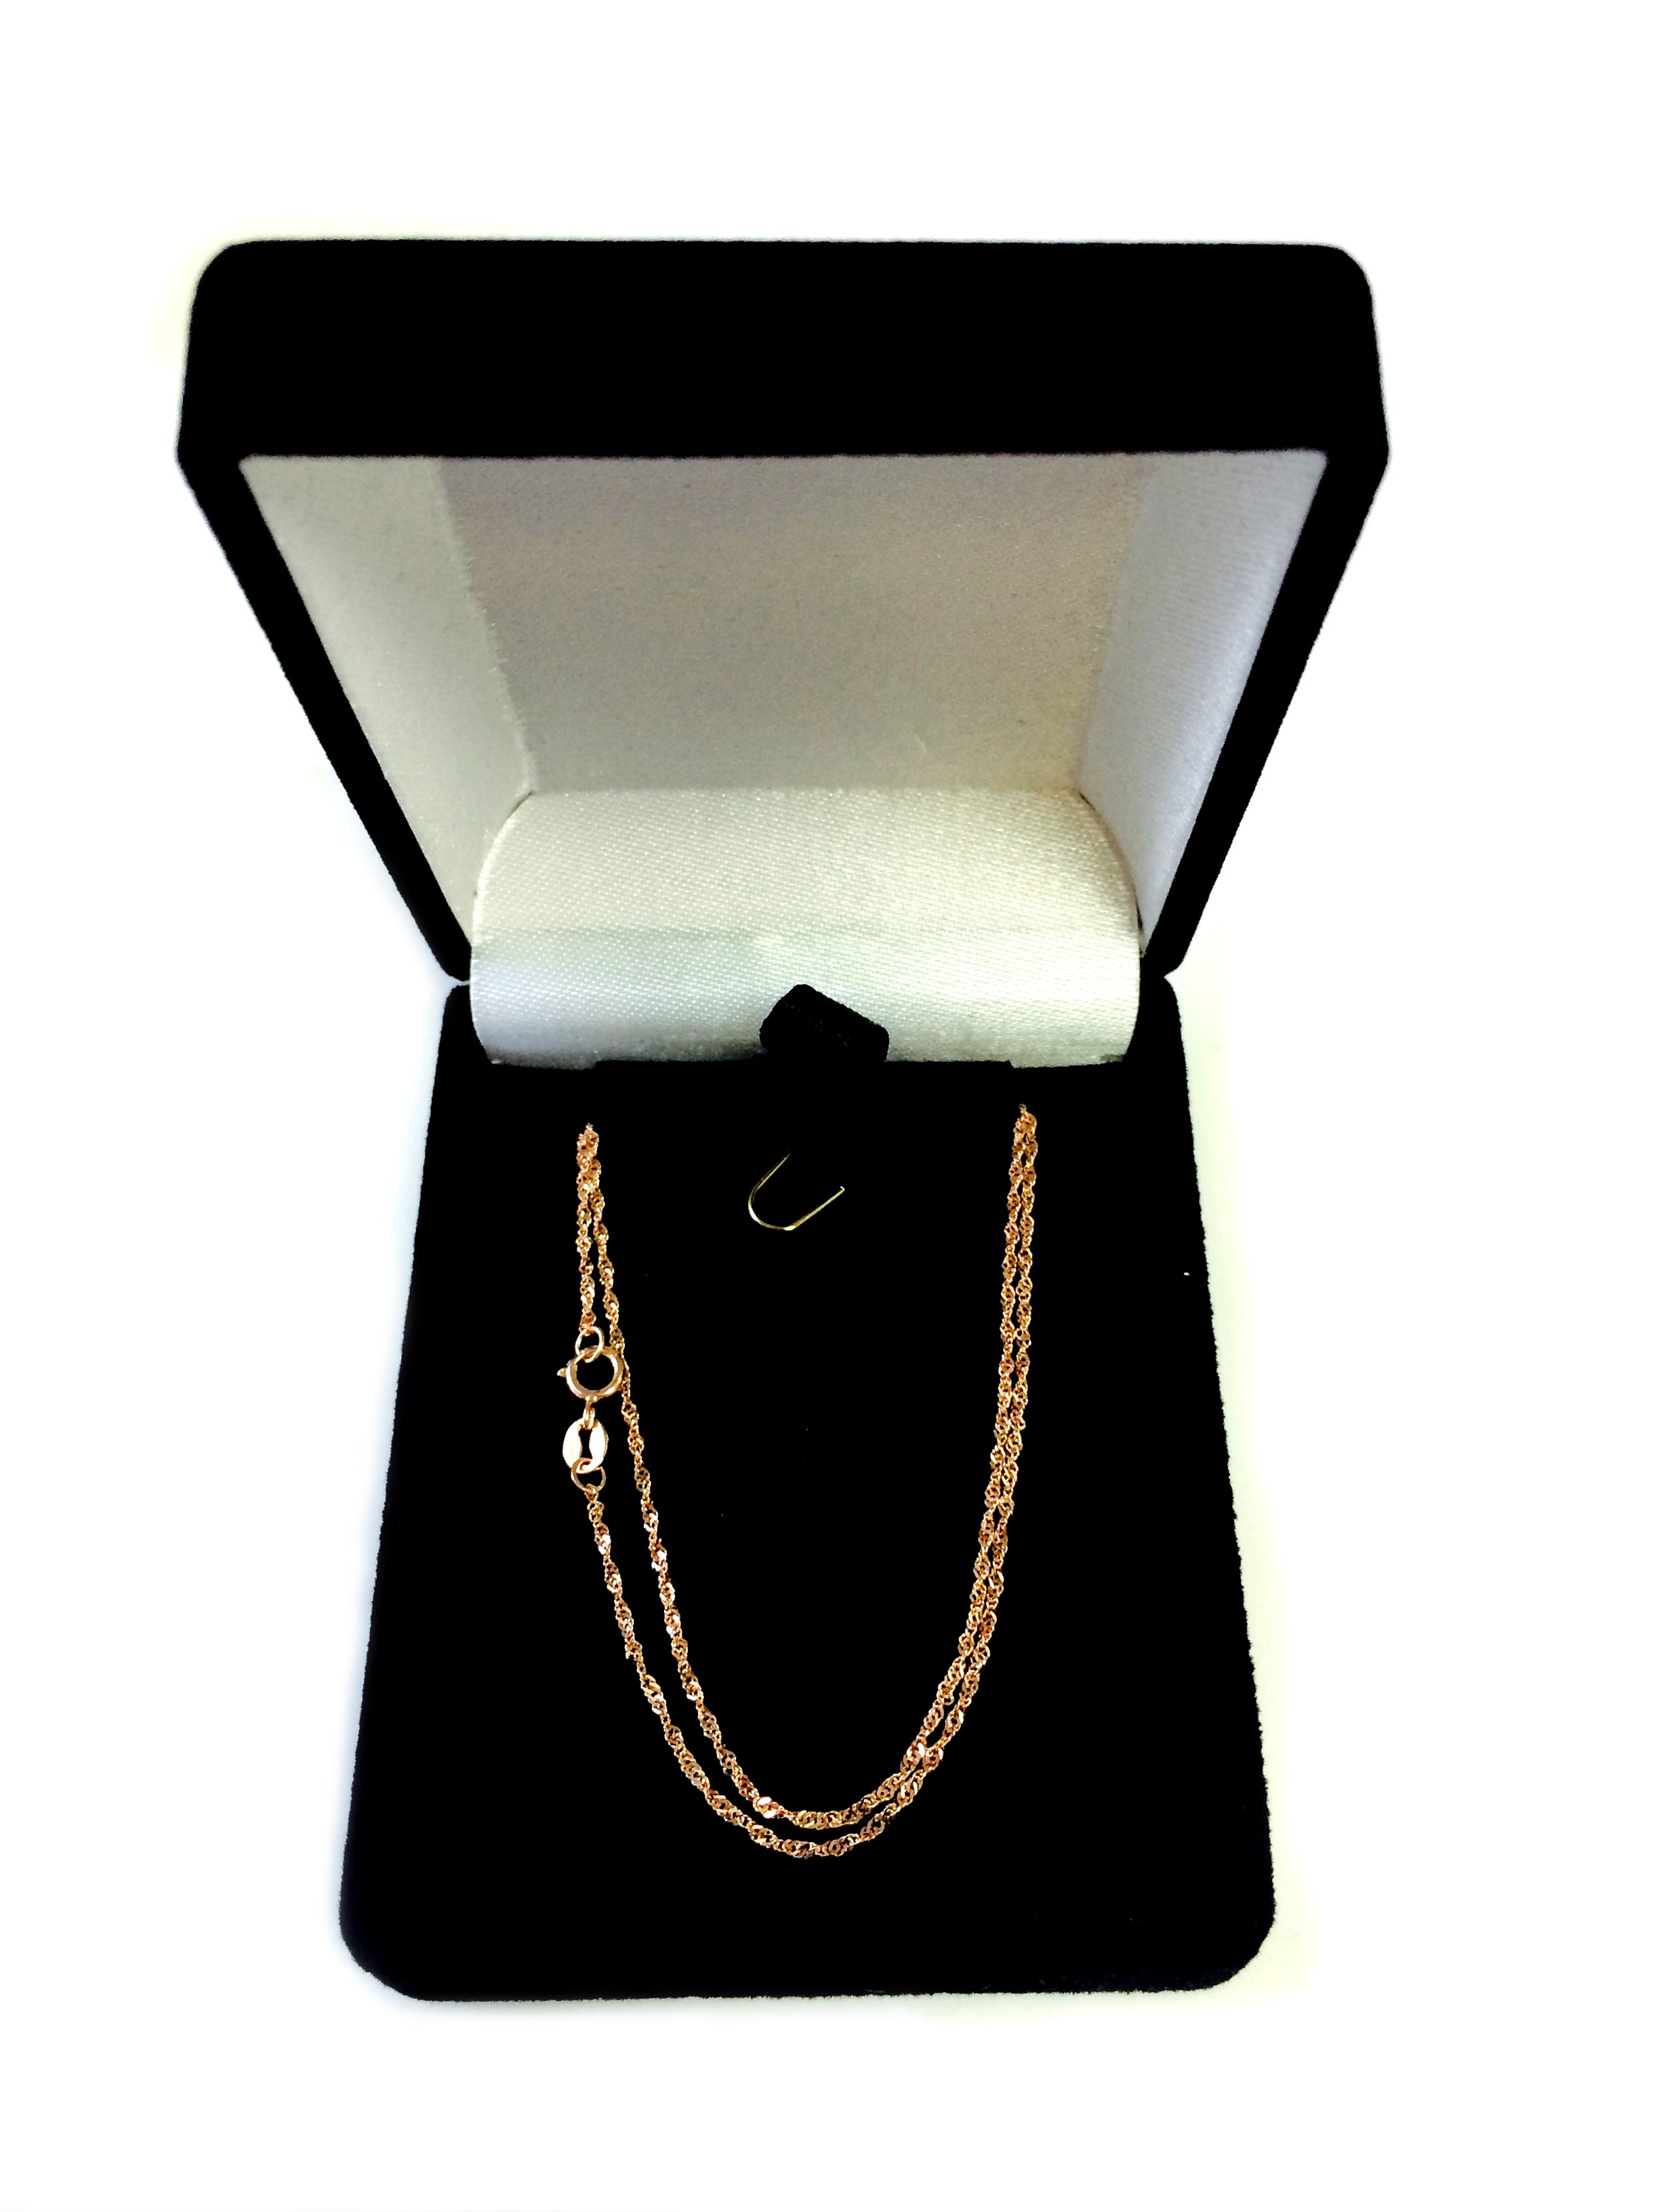 14k Rose Gold Singapore Chain Necklace, 1.0mm fine designer jewelry for men and women